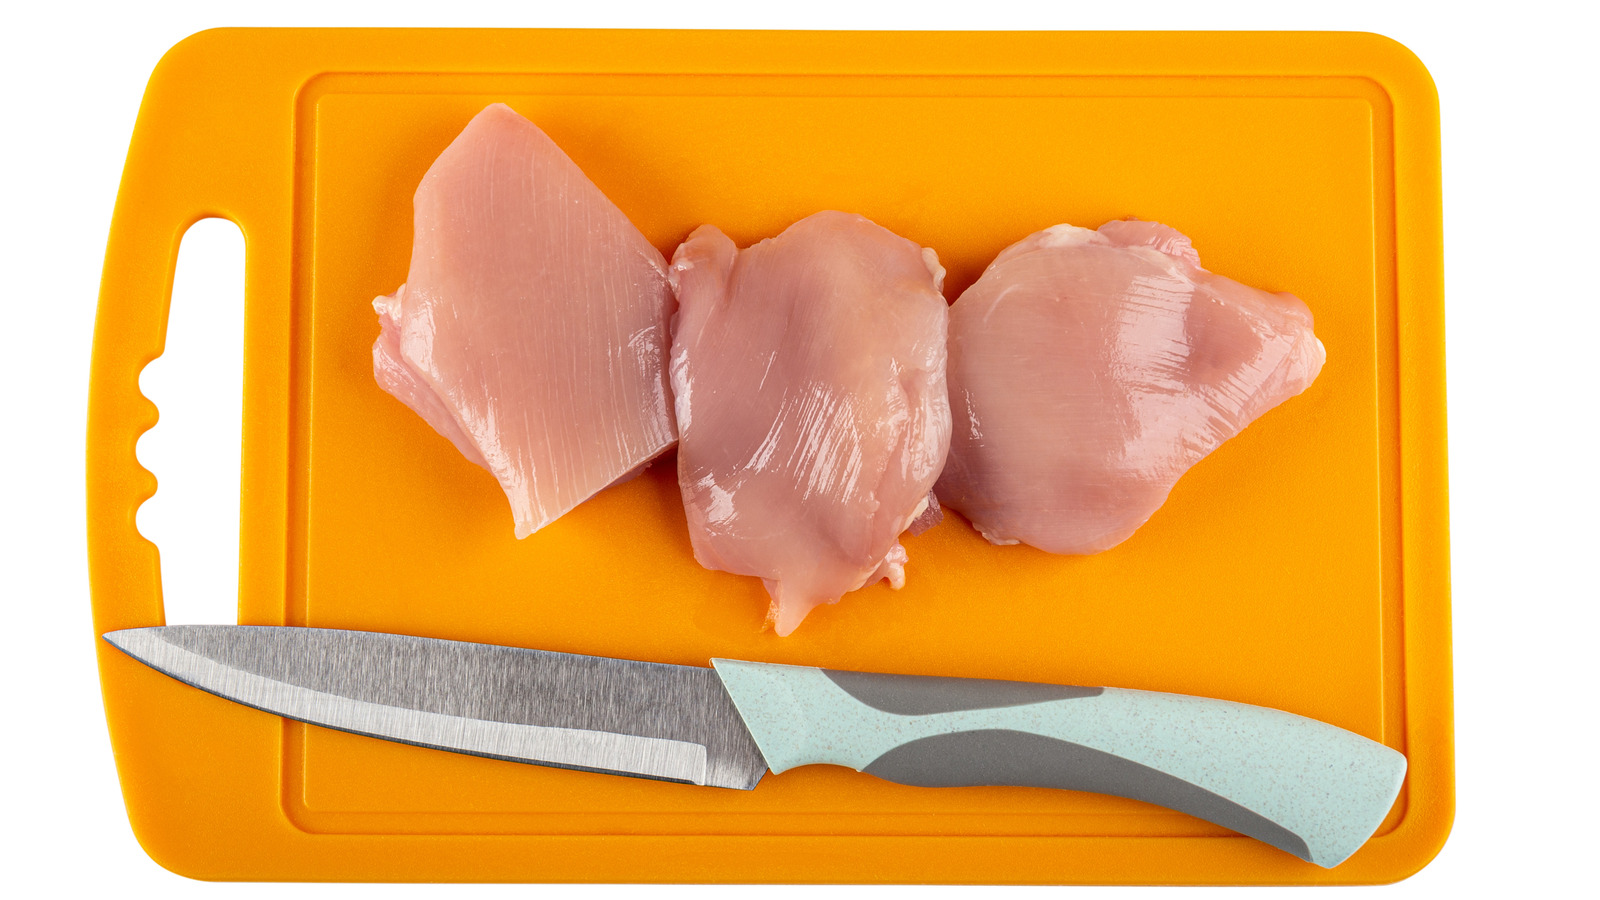 https://www.mashed.com/img/gallery/heres-why-you-should-have-a-separate-cutting-board-for-raw-chicken/l-intro-1673636355.jpg